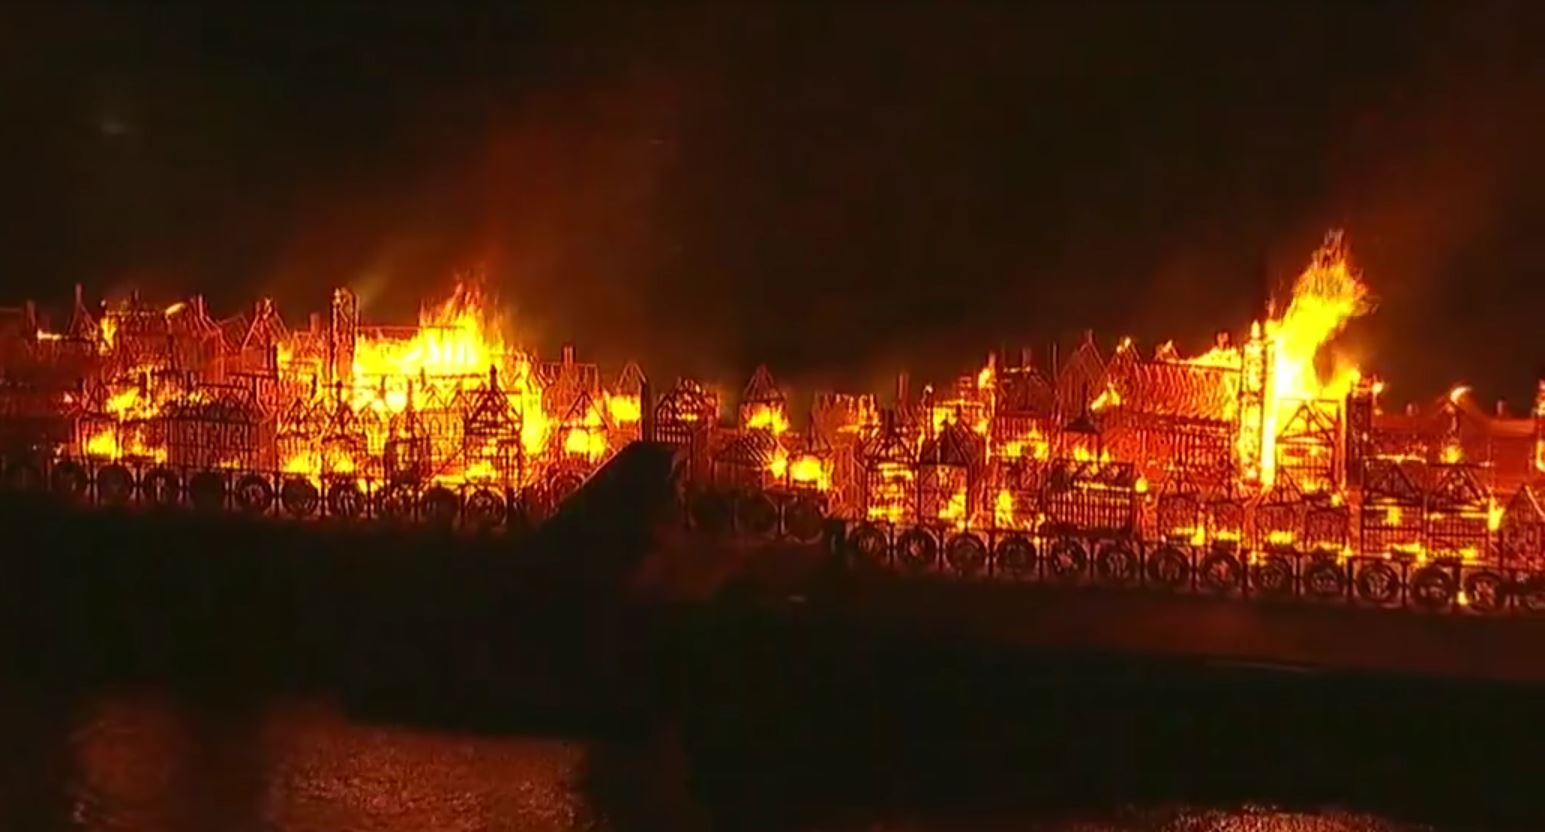 Huge recreation of Great Fire of London set ablaze on the Thames